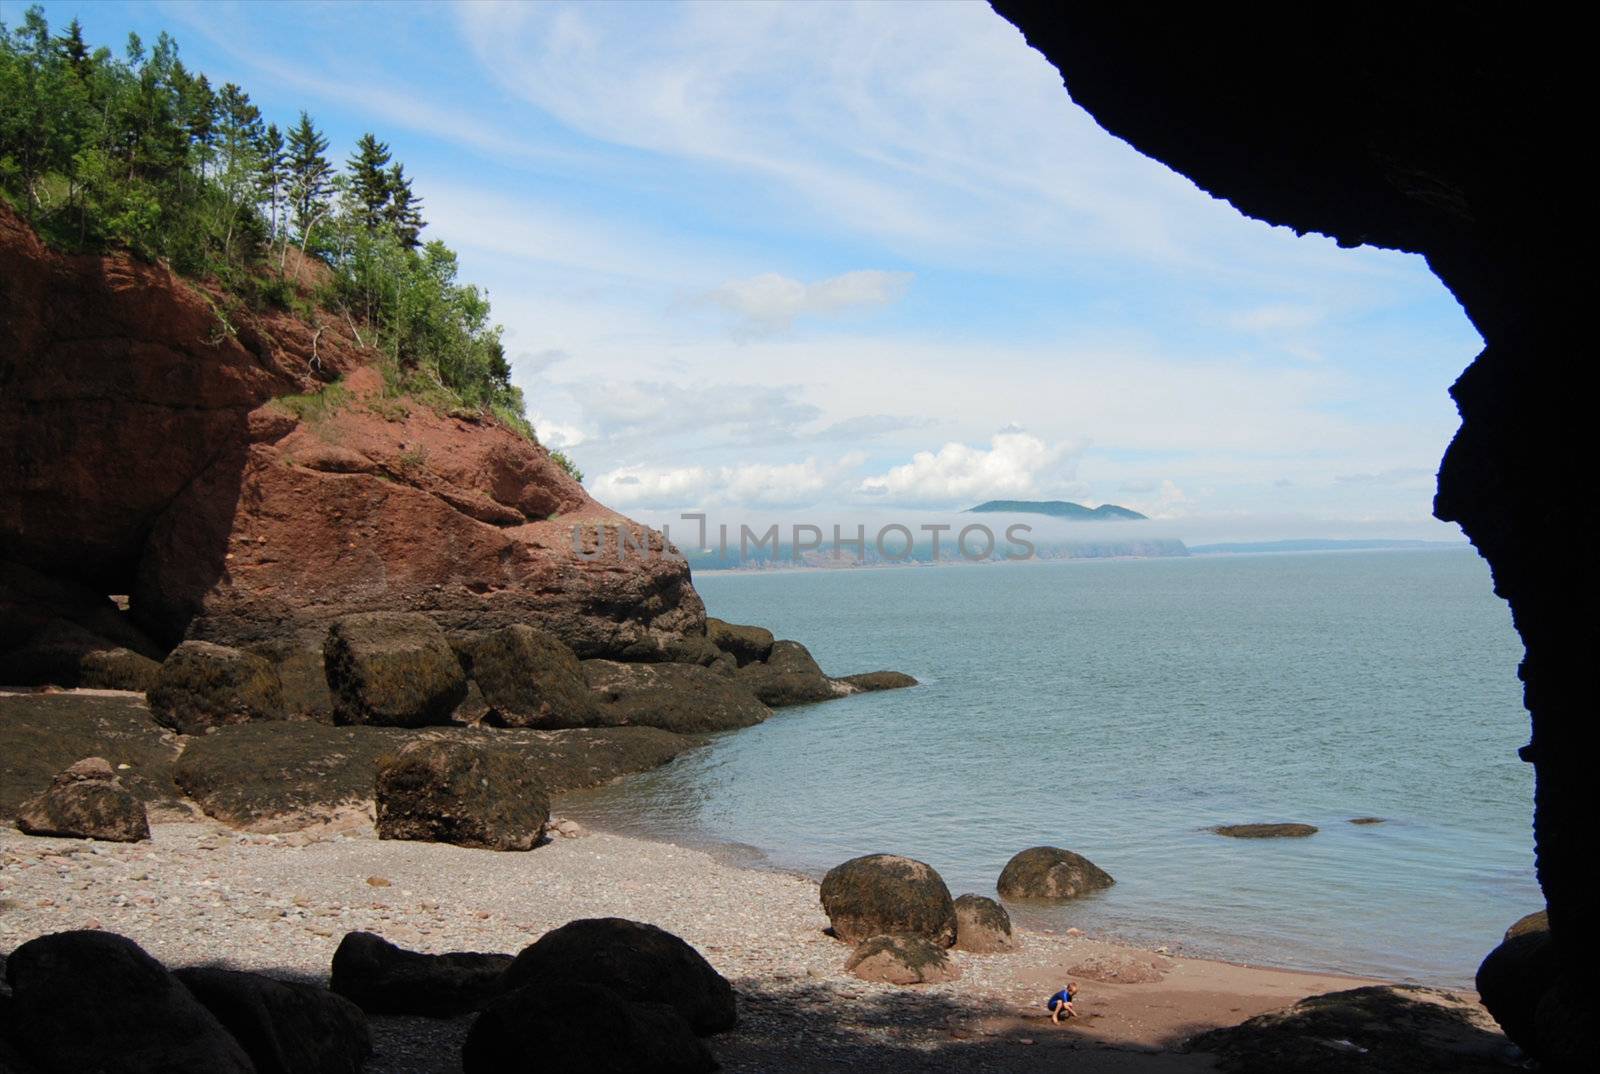 Cliffs in Fundy National Park, as seen from in a sea cave.